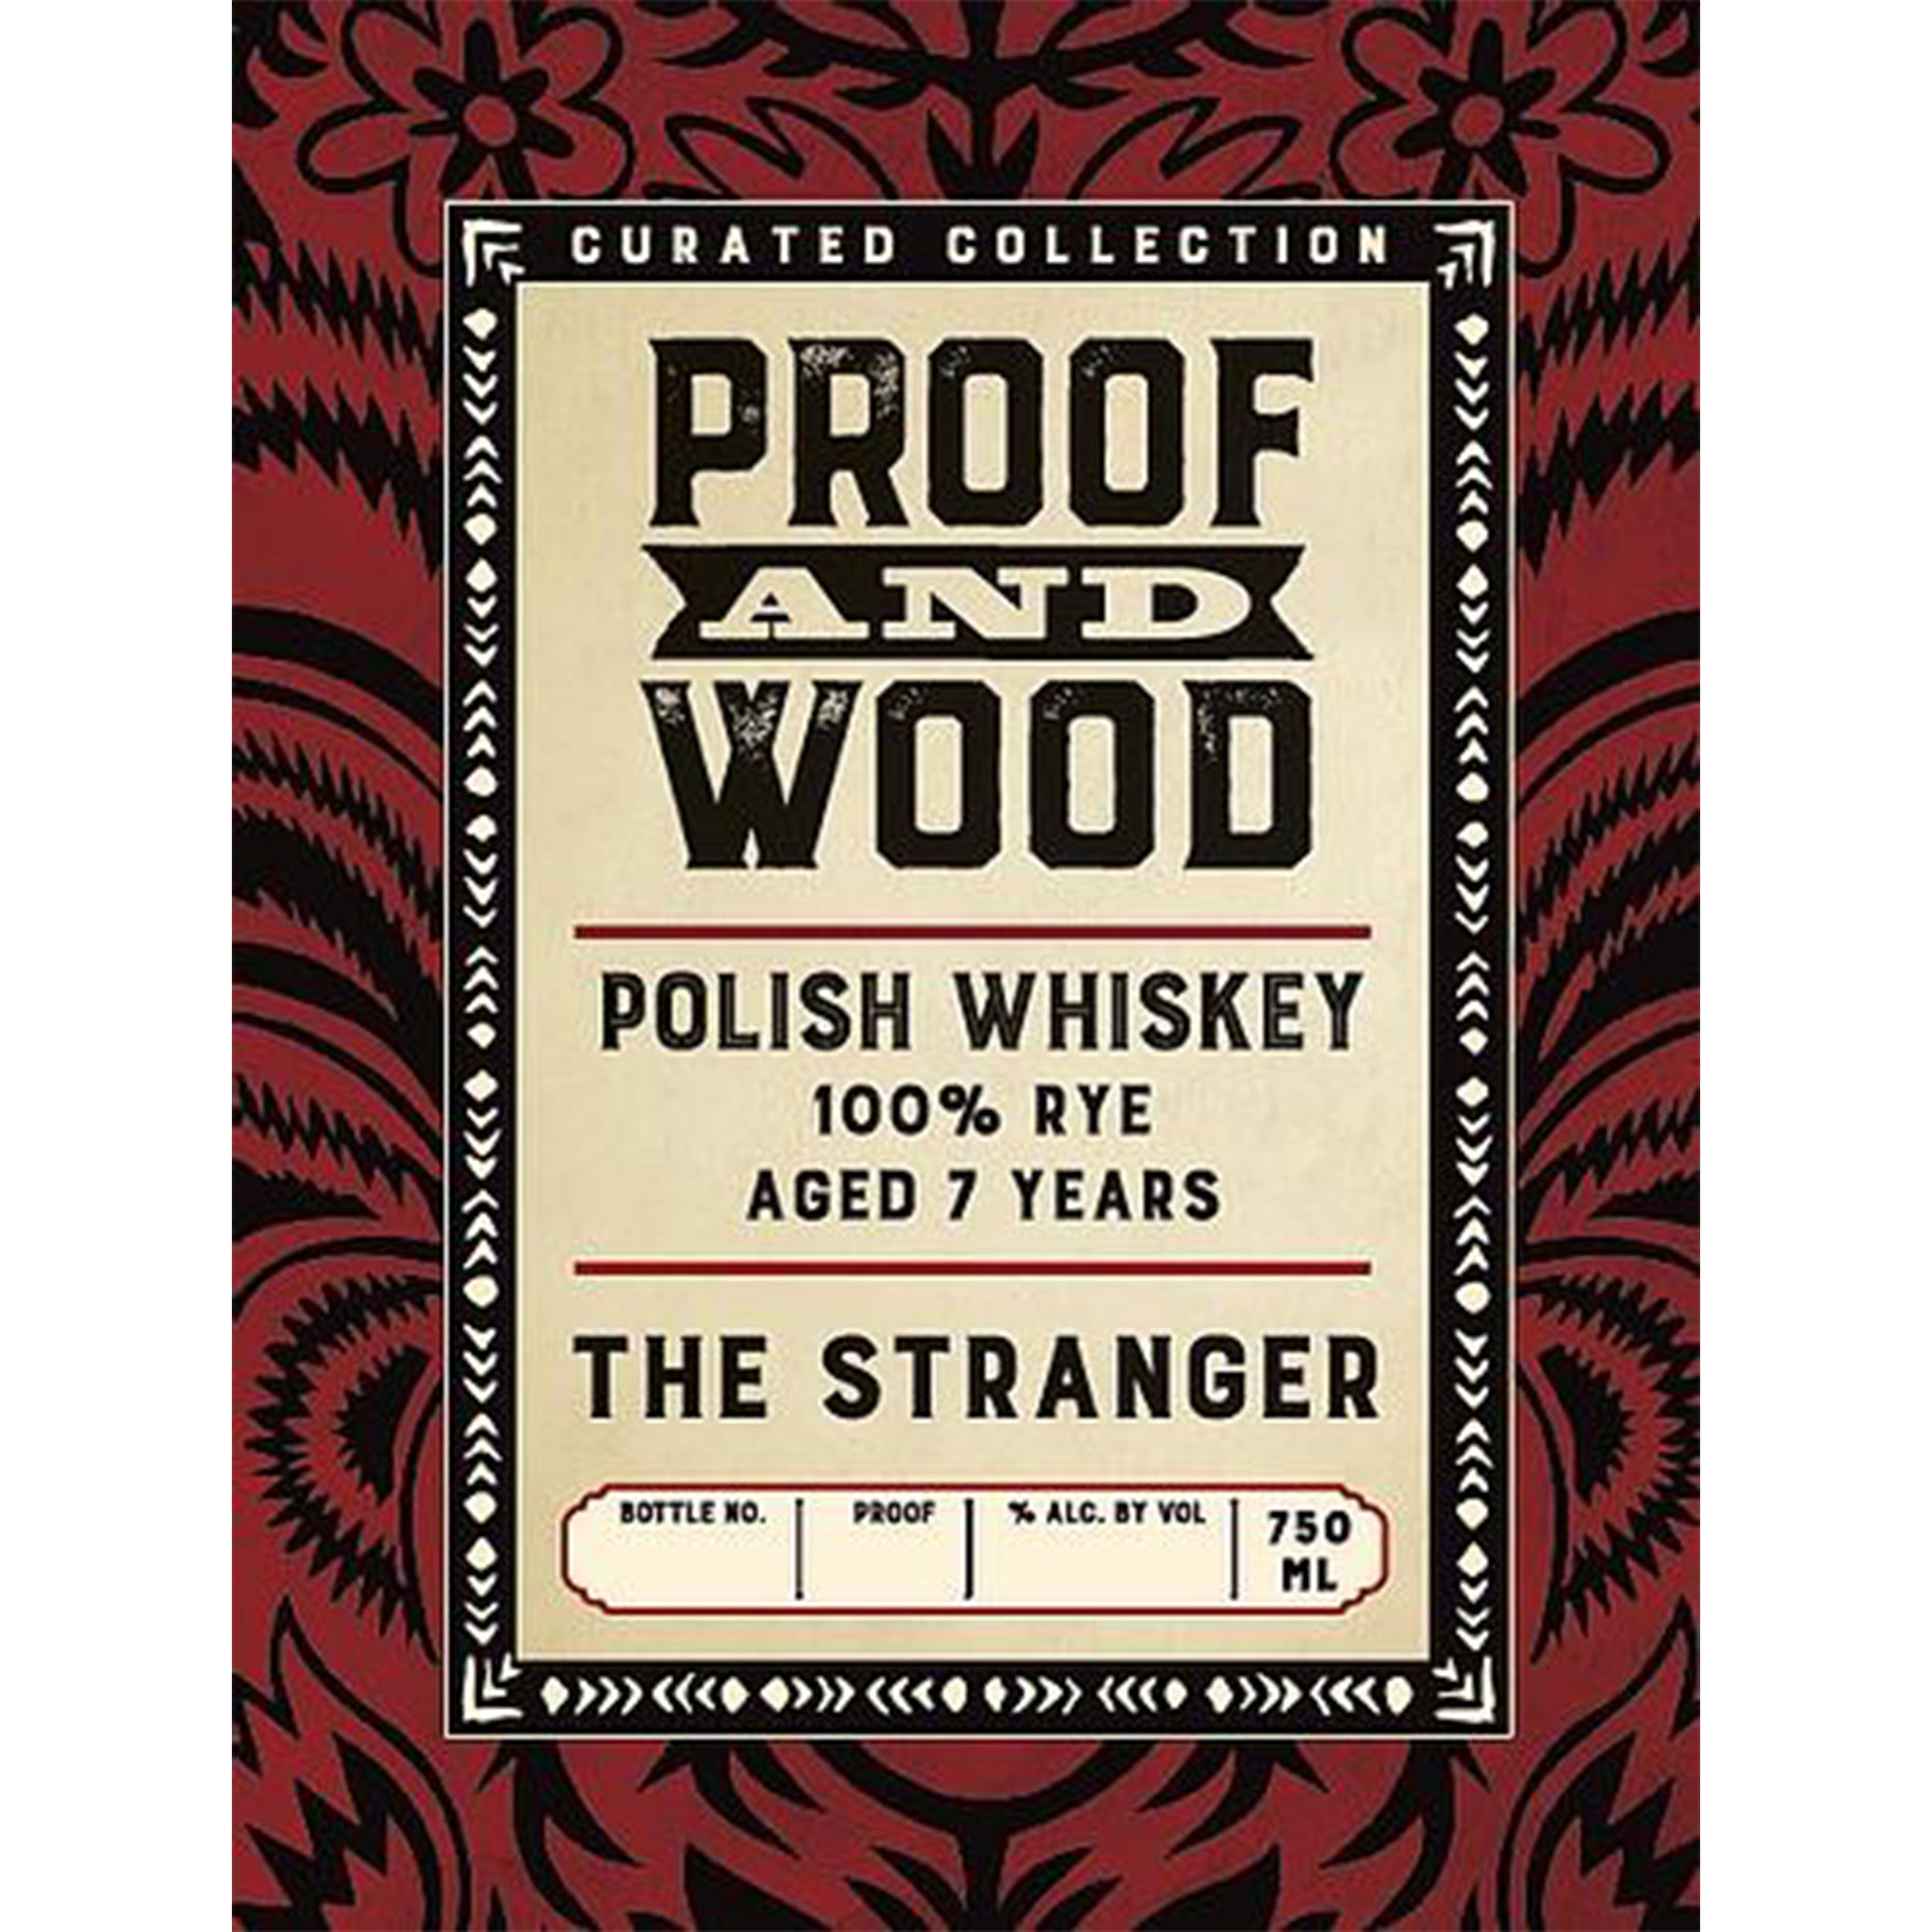 Proof and Wood Curated Collection The Stranger 7 Year Polish Whiskey